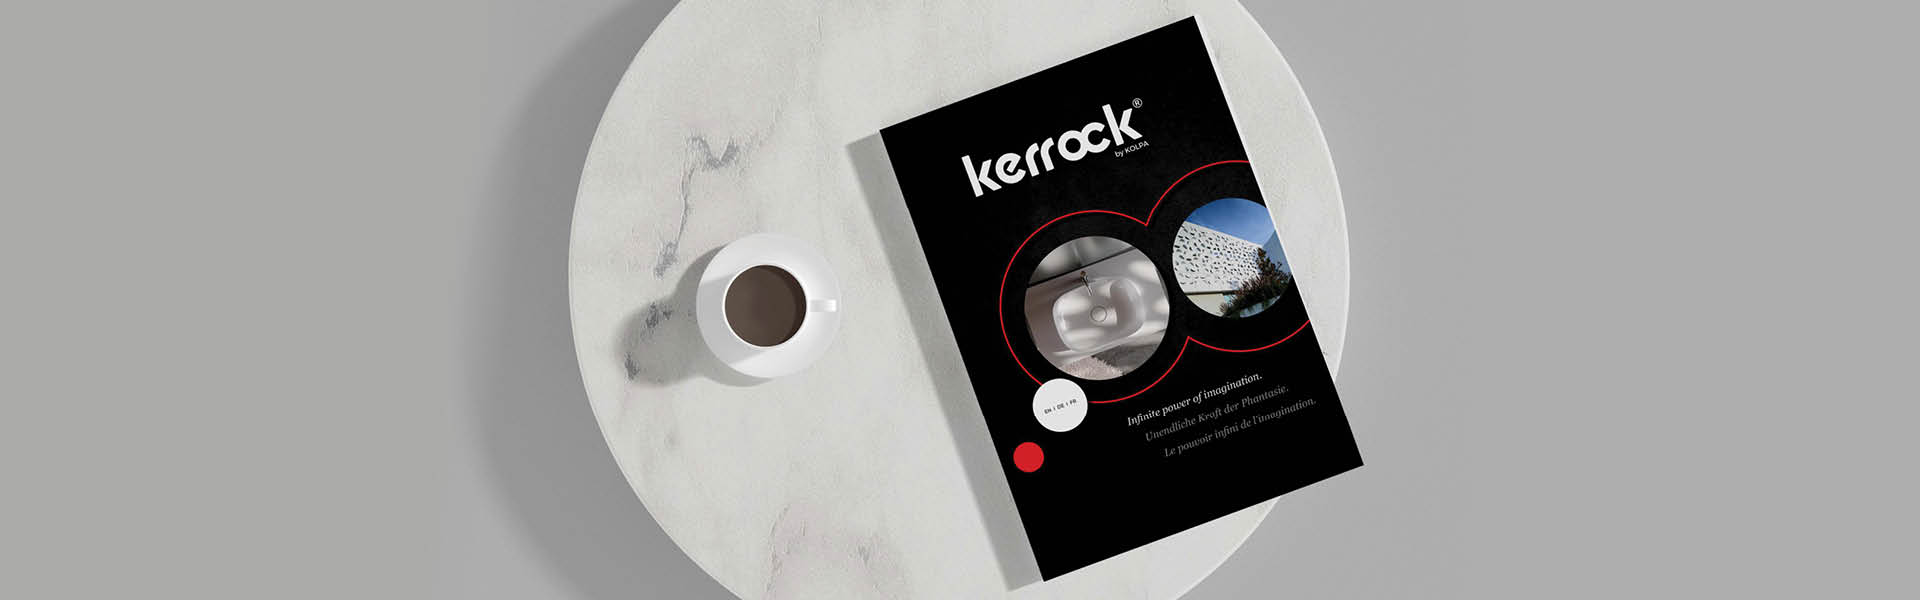 A new, redesigned Kerrock image catalogue